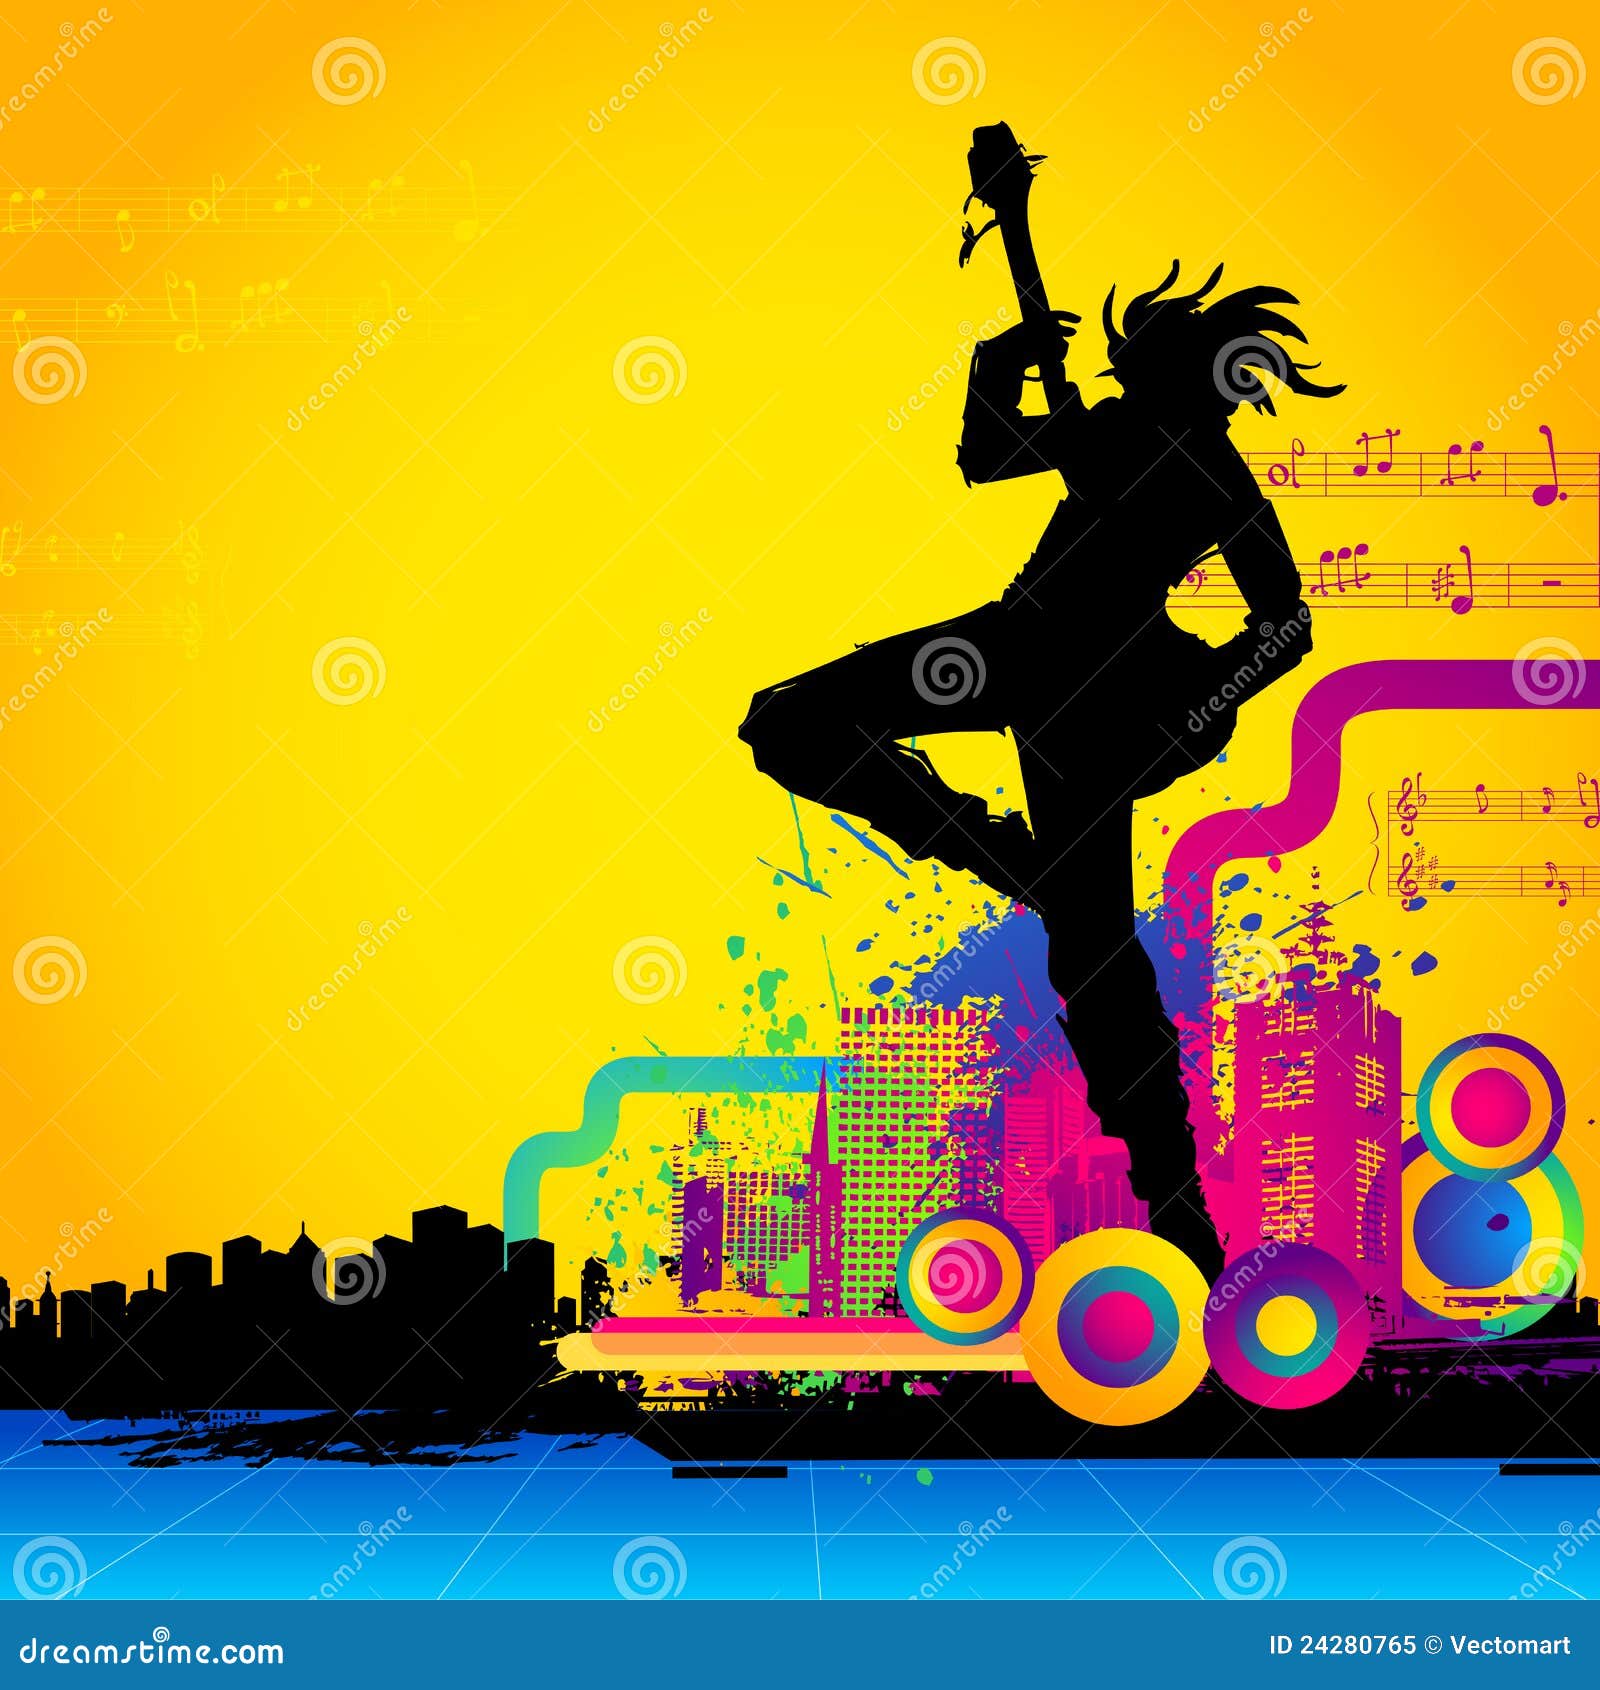 Rockstar with Guitar stock vector. Illustration of fashion - 24280765